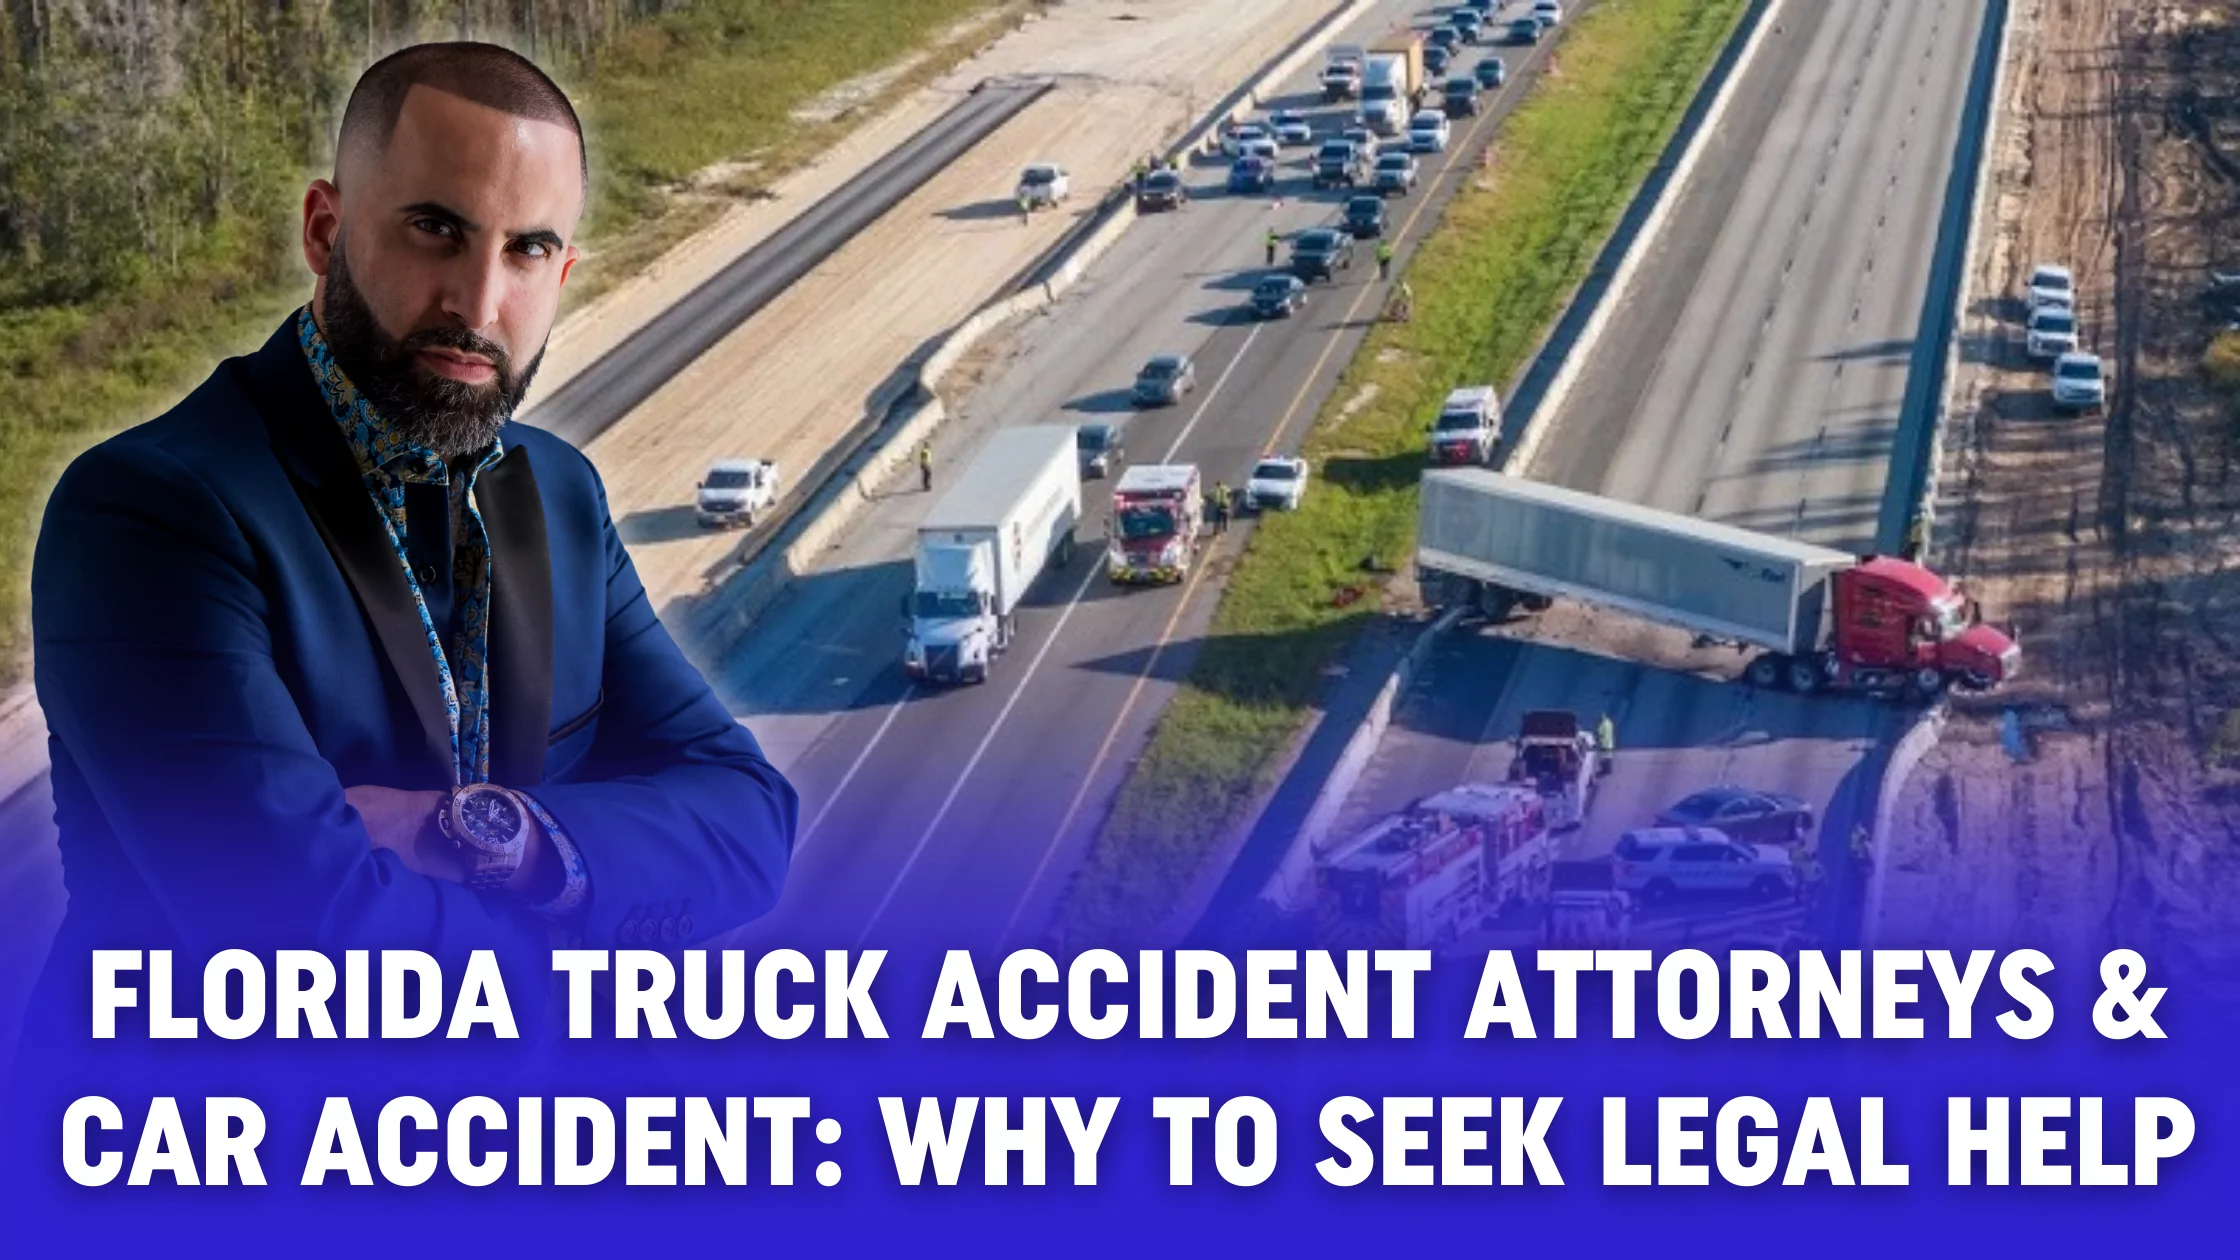 Florida Truck Accident Attorneys & Car Accident: Why to Seek Legal Help?